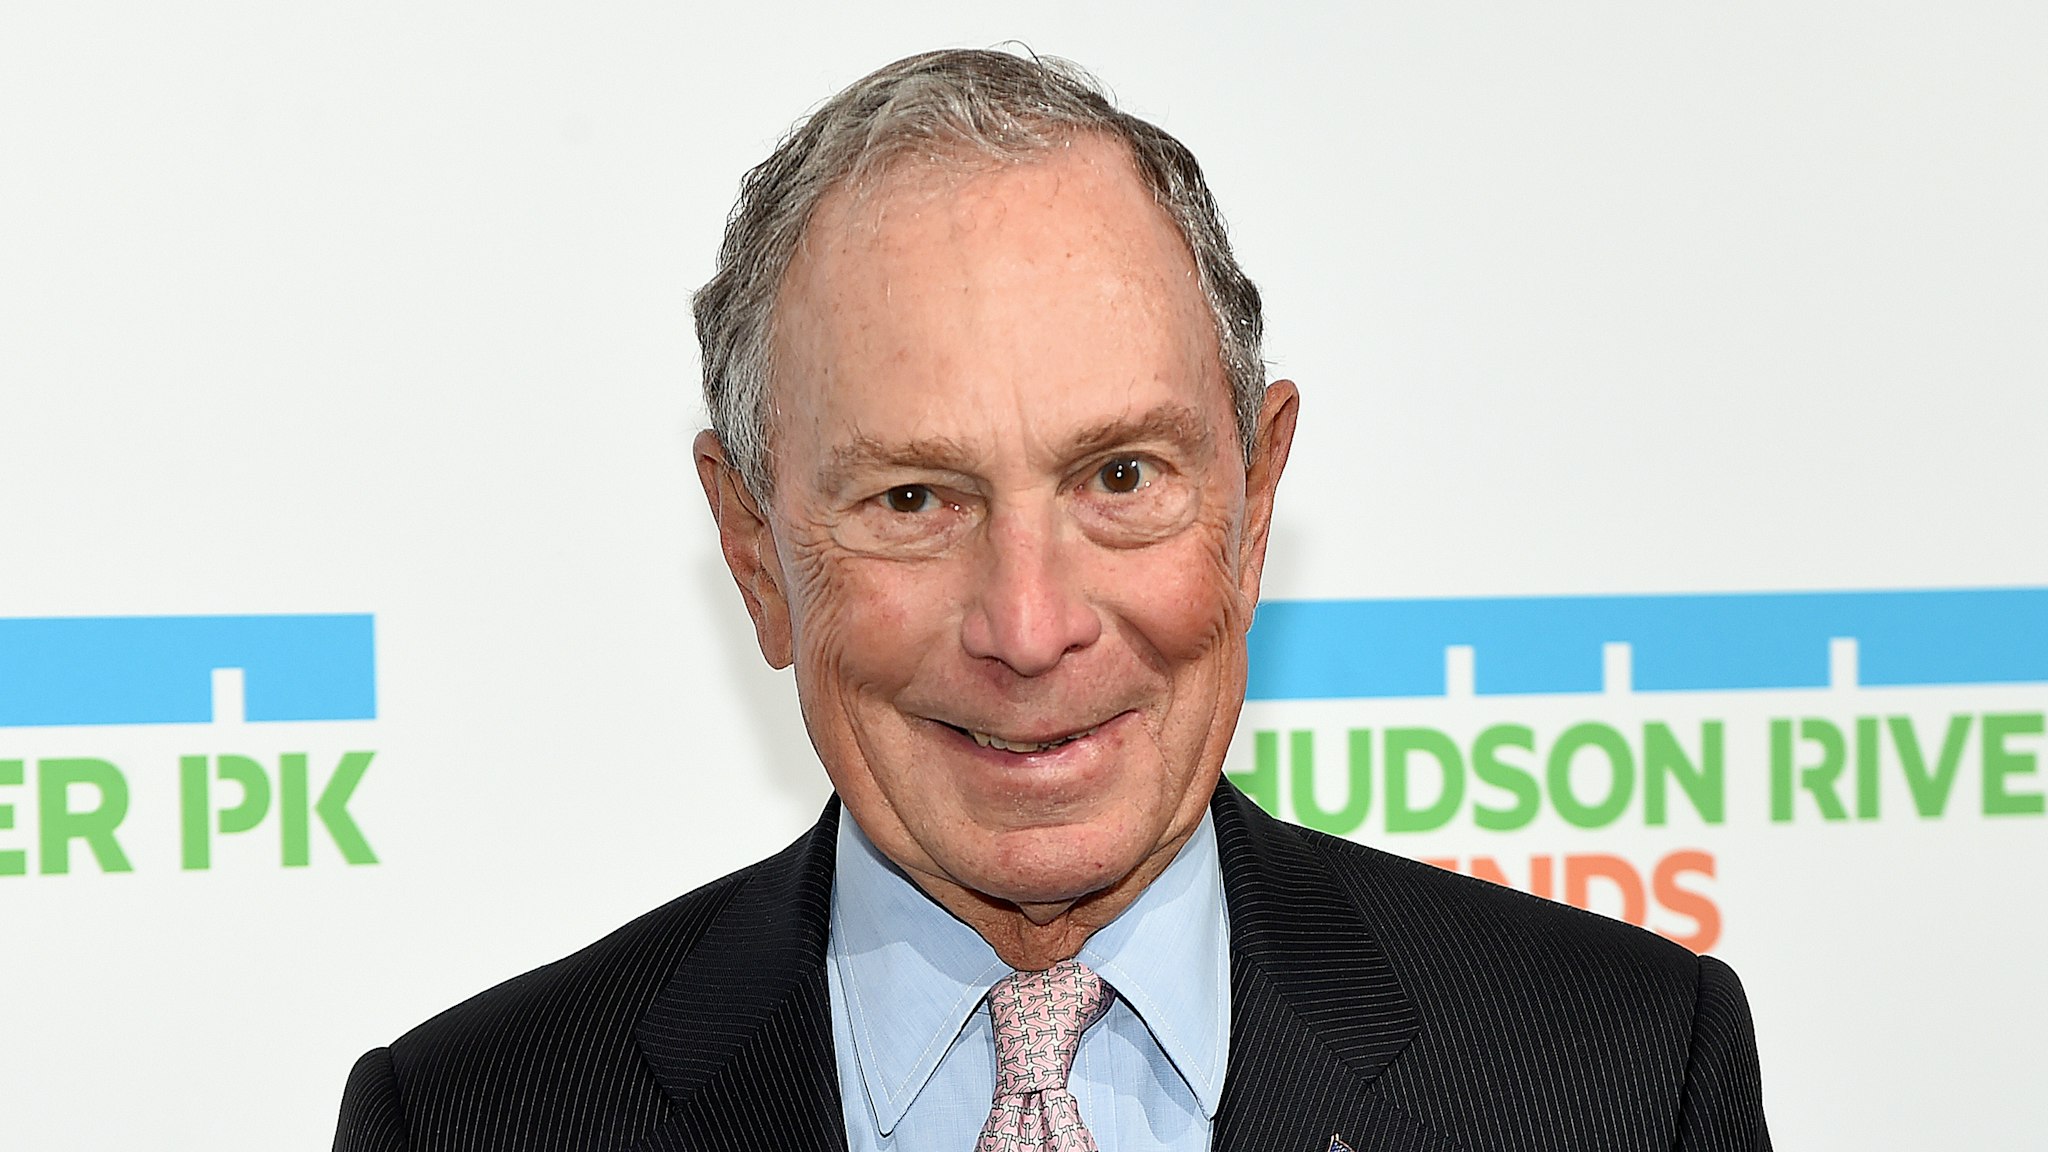 Michael Bloomberg attends the Hudson River Park Annual Gala at Cipriani South Street on October 17, 2019 in New York City.